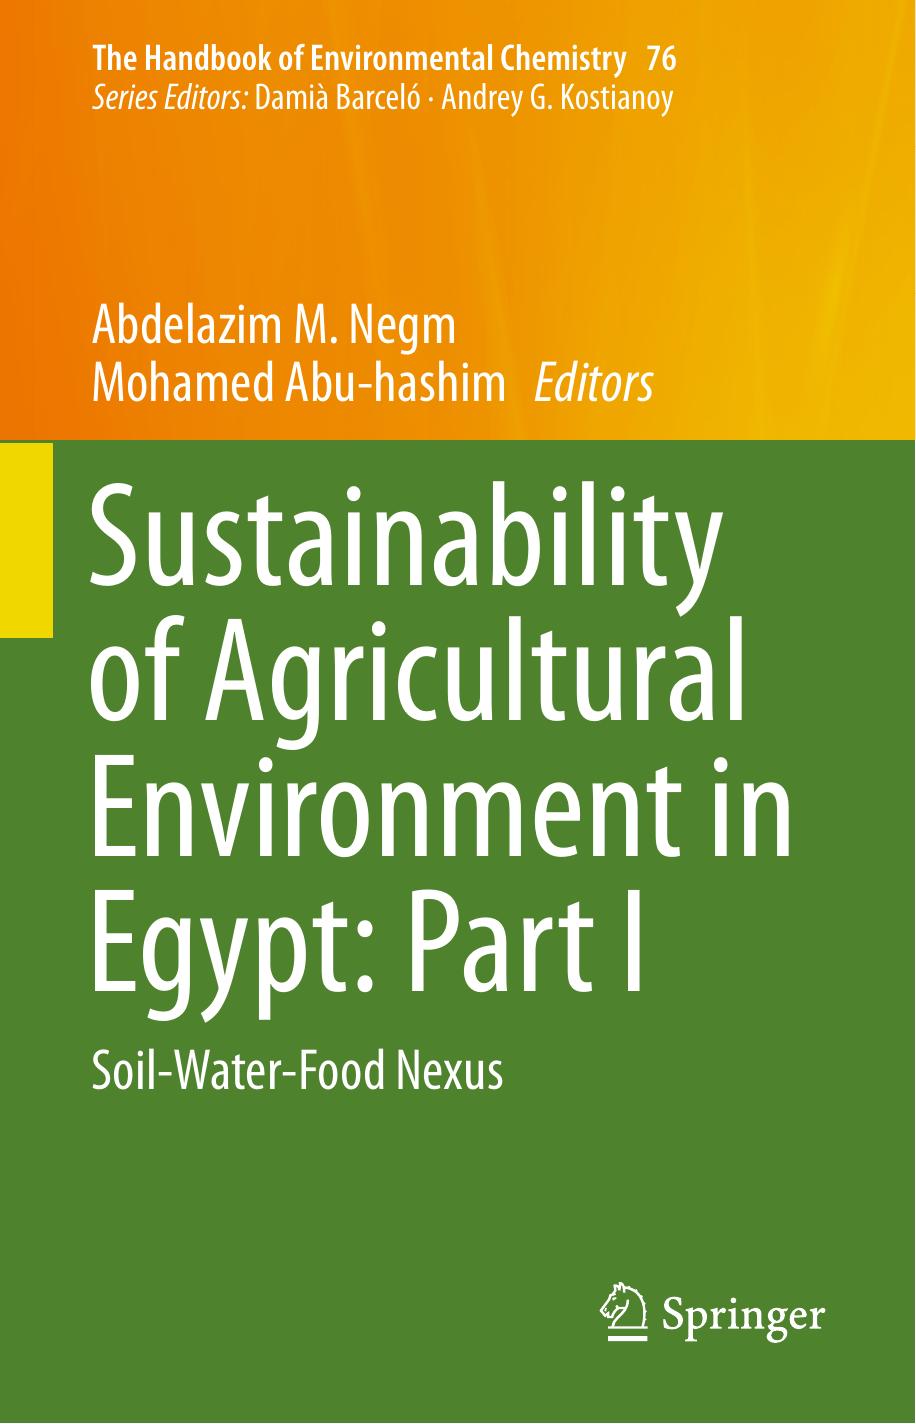 Sustainability of Agricultural Environment in Egypt Part I Soil-Water-Food Nexus 2019